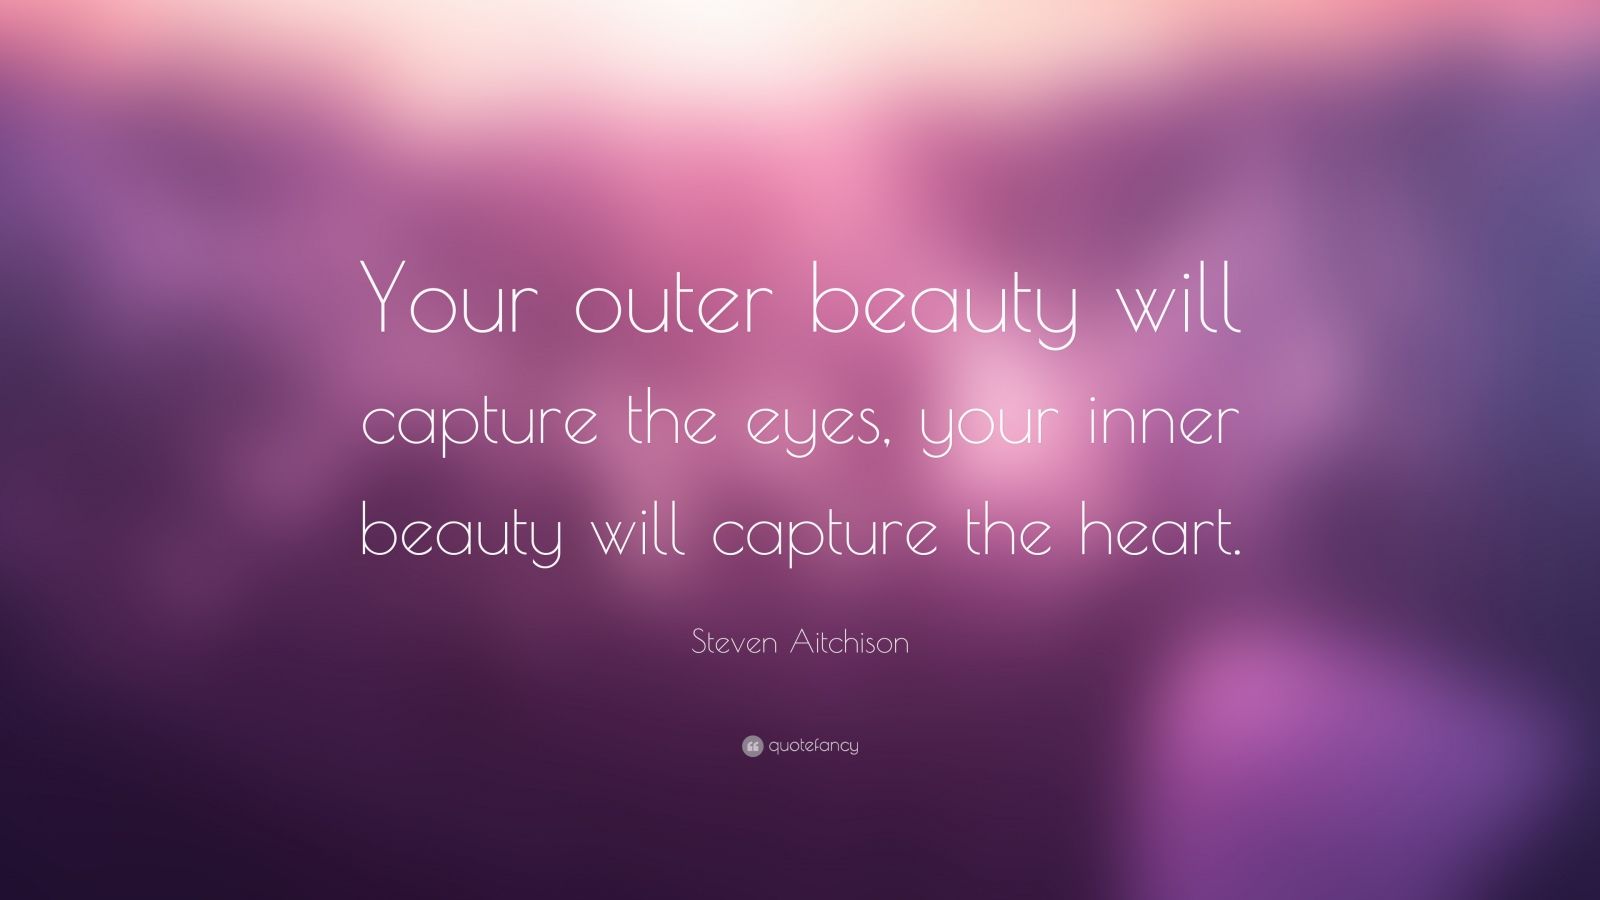 135447 Steven Aitchison Quote Your Outer Beauty Will Capture The Eyes 